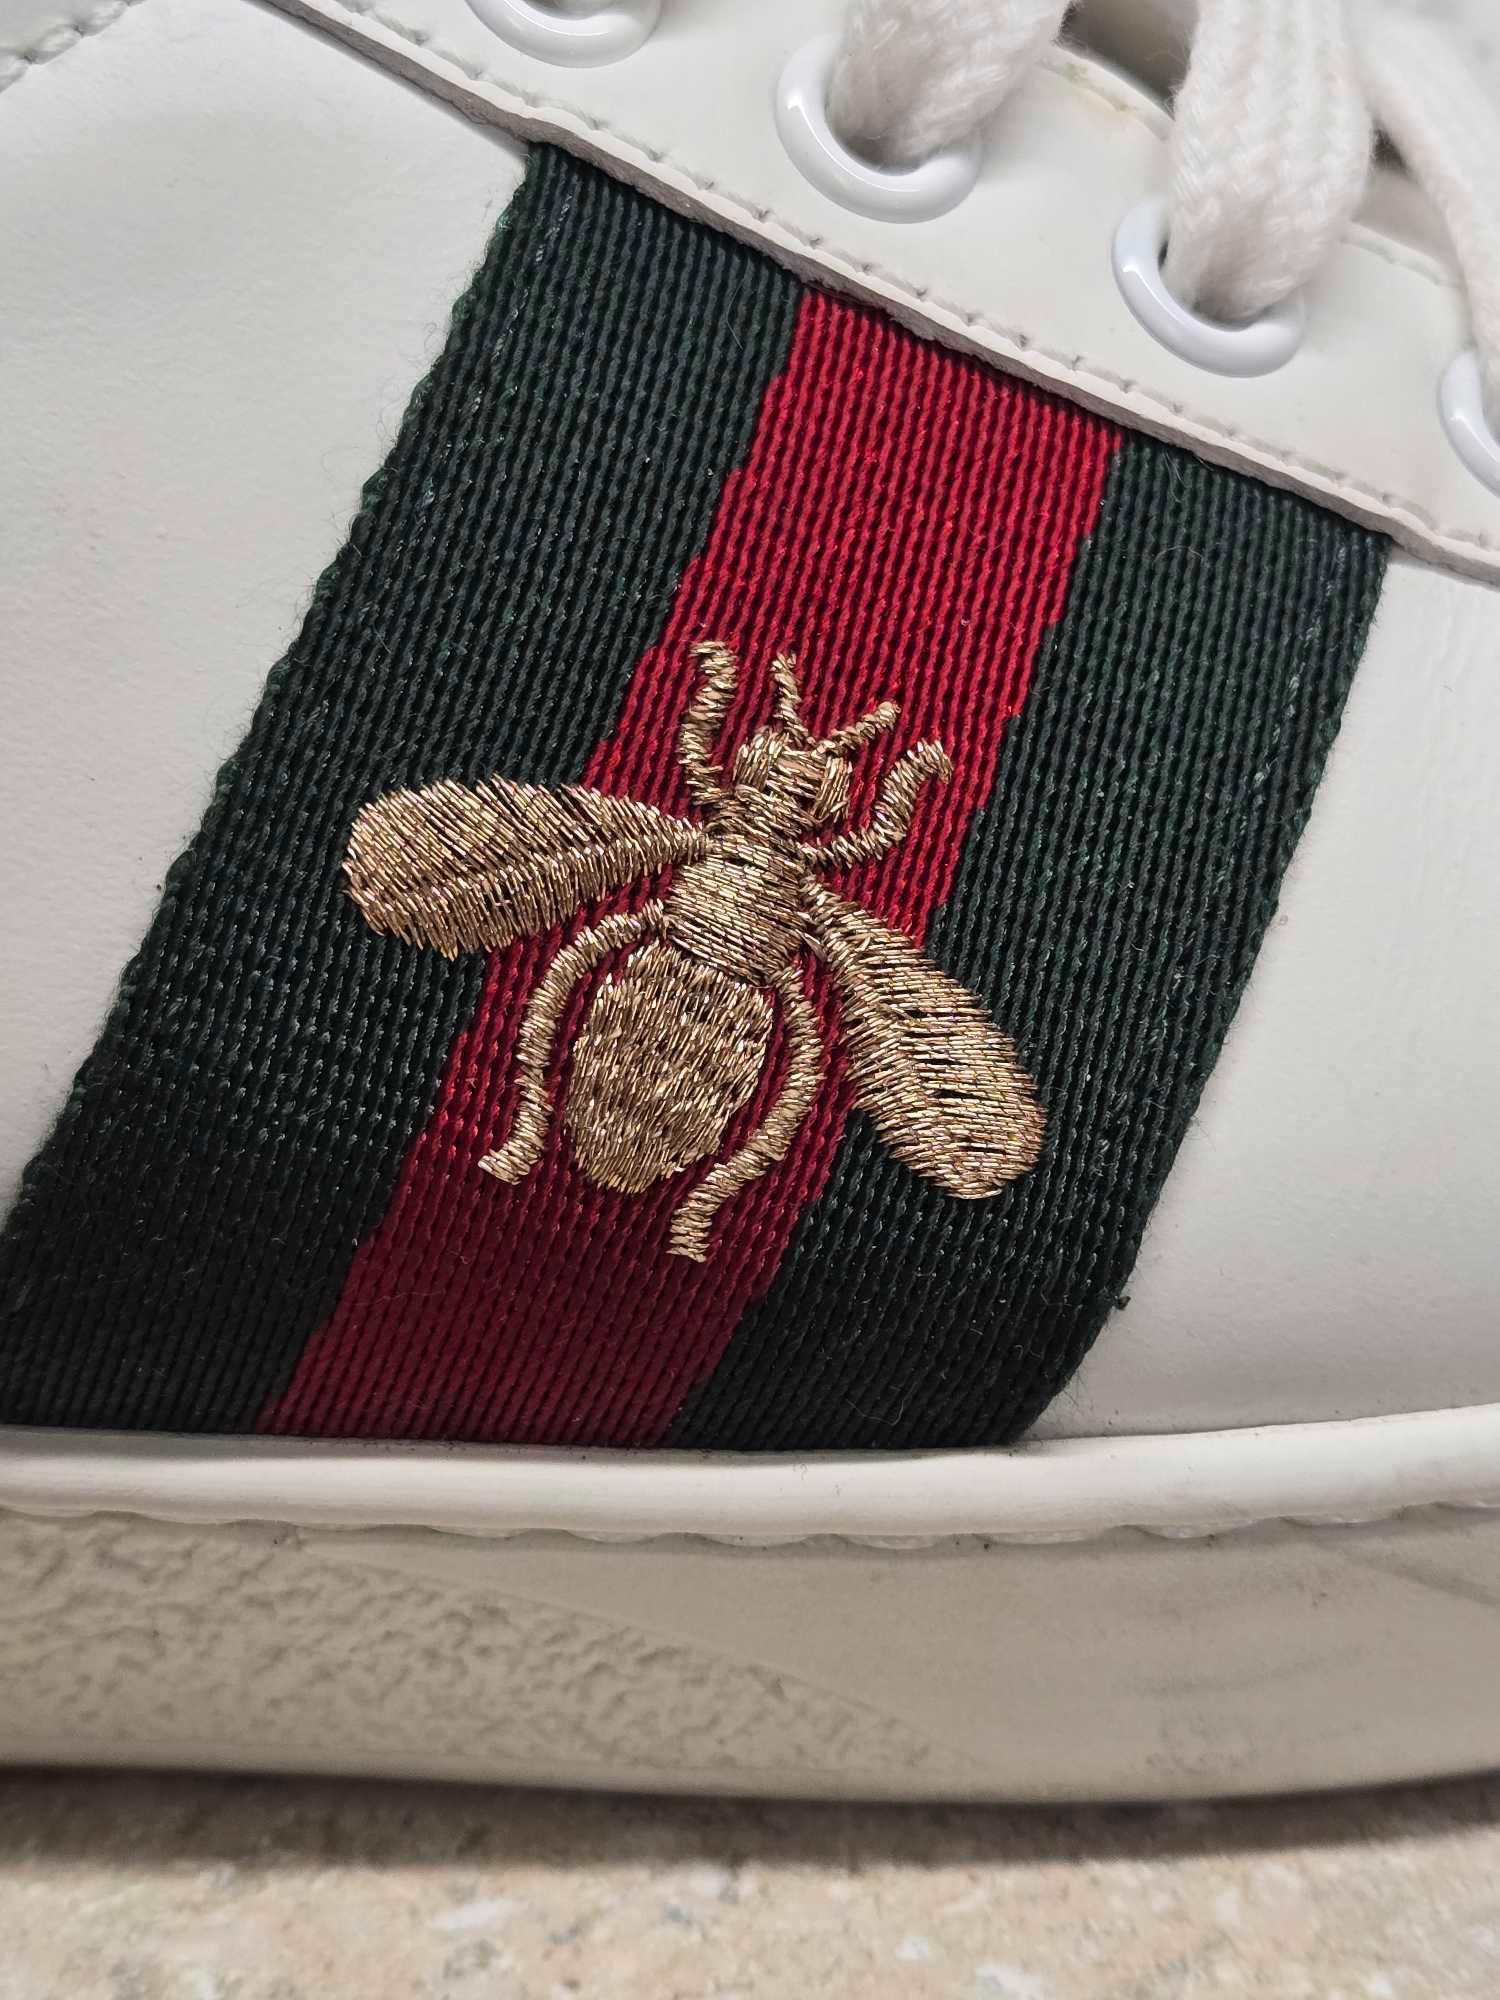 Authentic Pre-Owned Women's Gucci Ace Bee Sneakers w/ COA